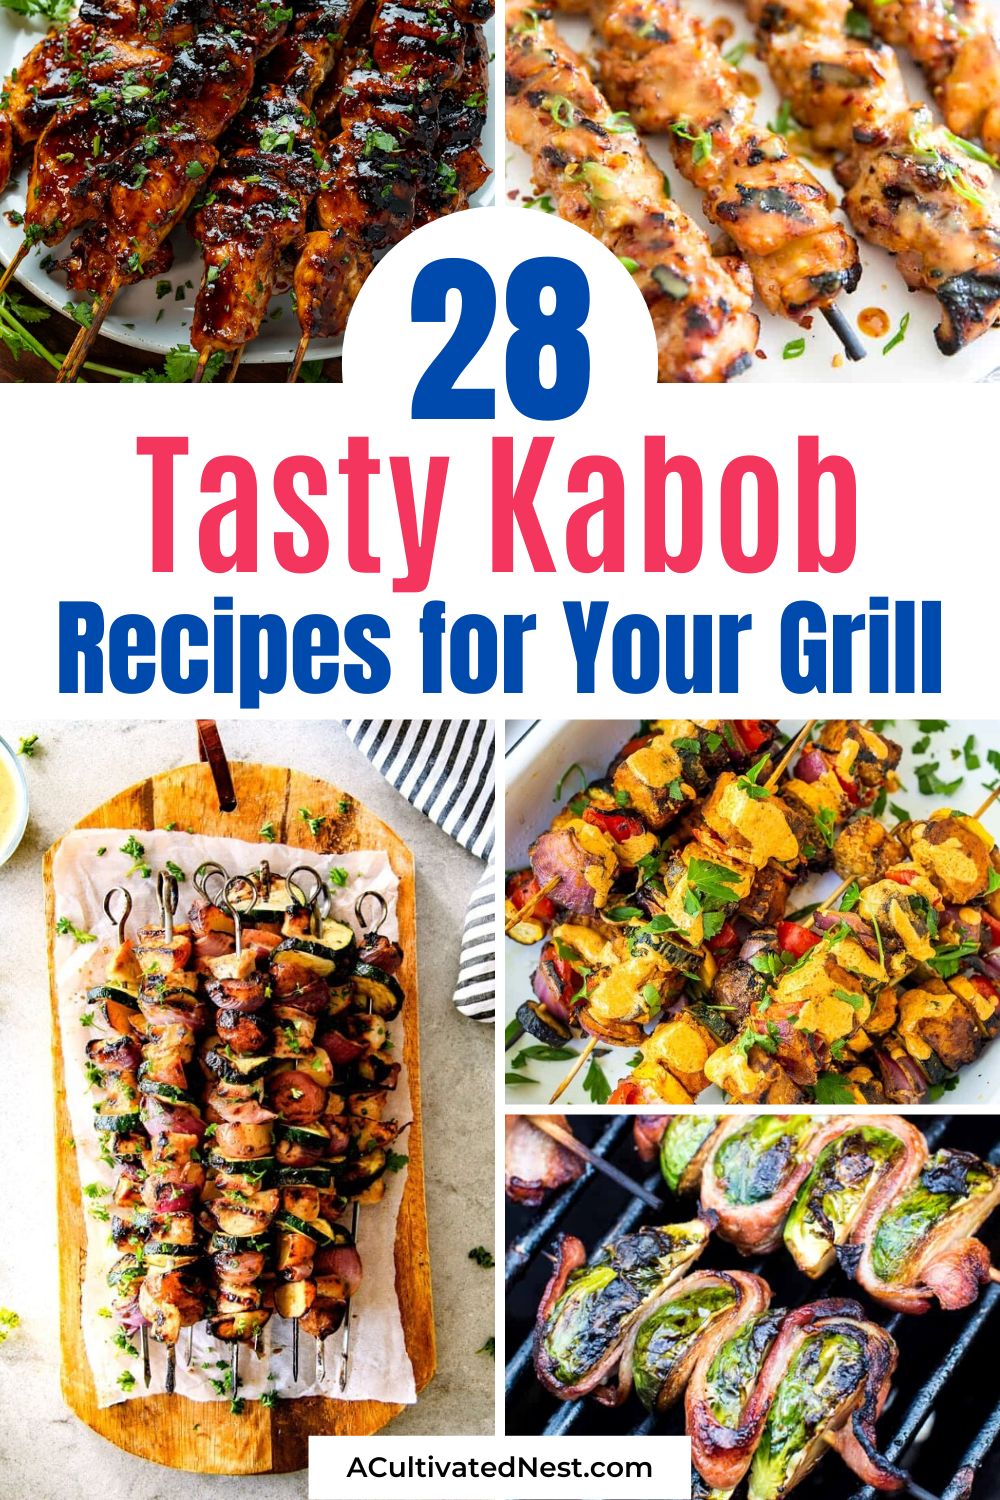 28 Tasty Kabob Recipes For Grilling- If you want a delicious summer recipe to put on your grill, then you'll like these kabob recipes for grilling! There are so many tasty grilled skewers you can make! | skewer recipes for the grill, summer recipes, #grillRecipes #kabobRecipes #skewerRecipes #summerRecipes #ACultivatedNest